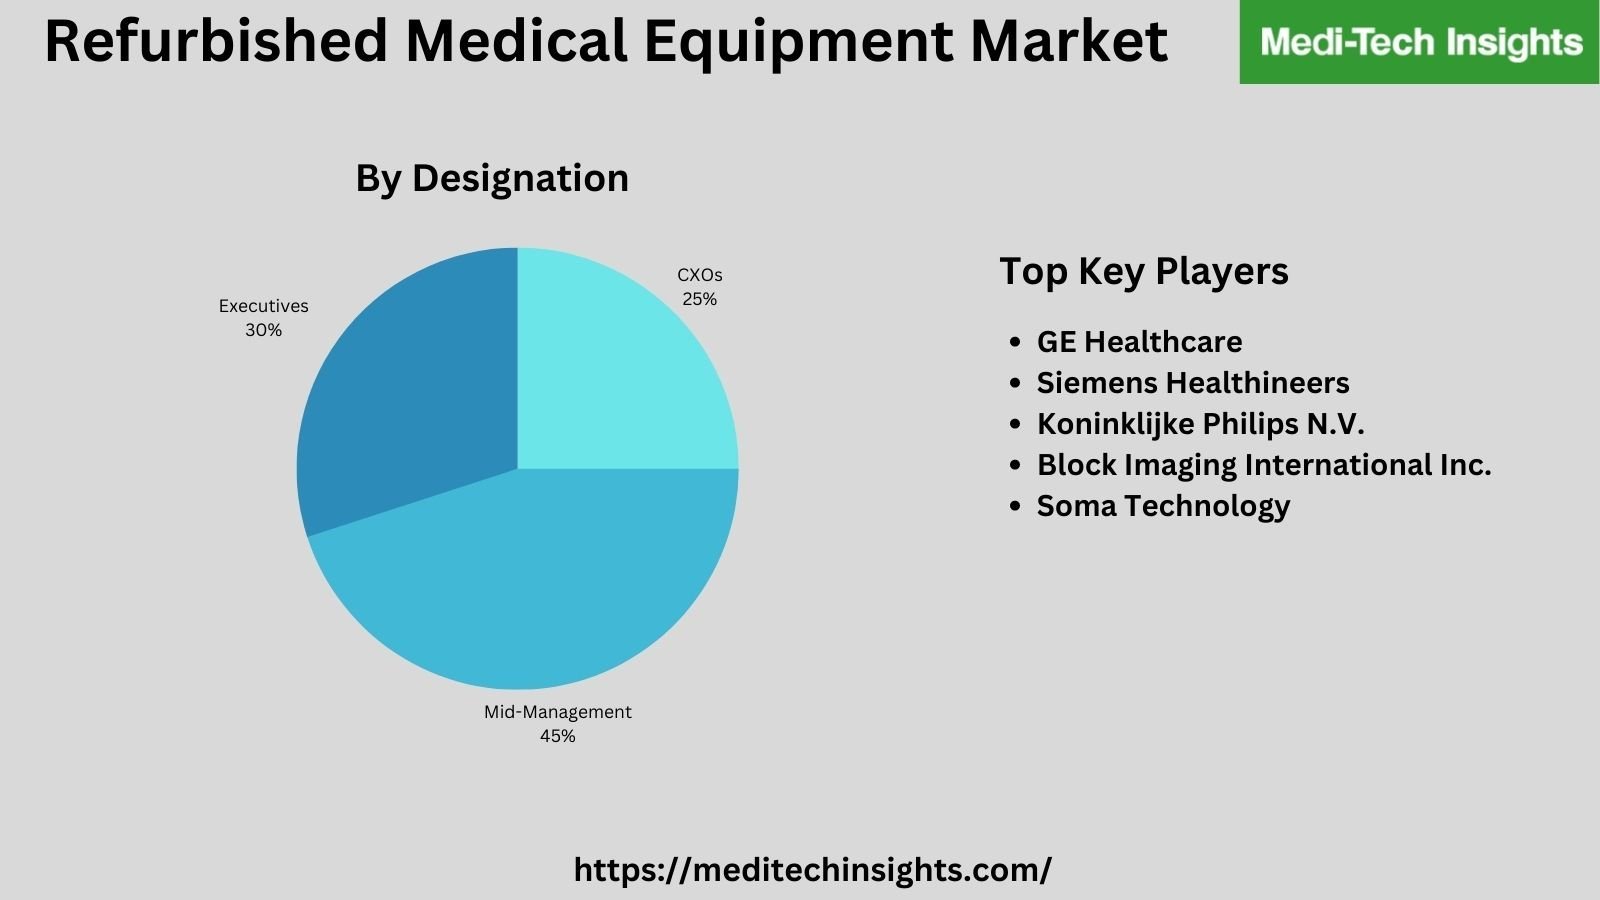 Refurbished Medical Equipment Market is expected to grow at a CAGR of ~12% to reach ~$18 billion by 2026